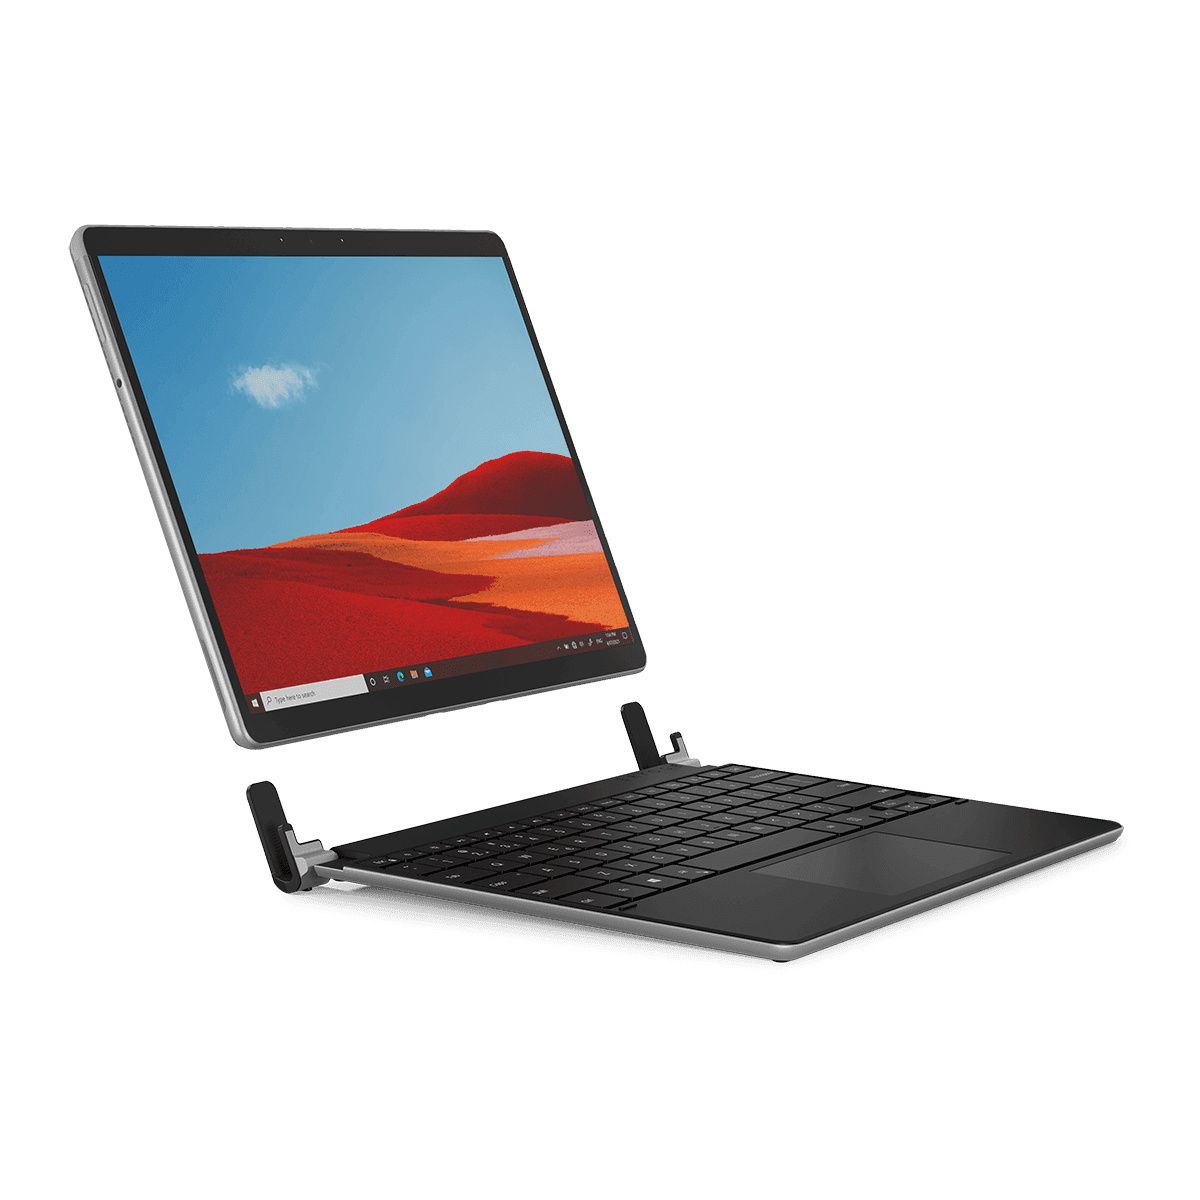 This keyboard accessory uses a clamp attachment and Bluetooth to connect to the Surface Pro 9, and it gives you a keyboard and touchpad. Because it has a solid design and tight hinges, it makes the Surface Pro 9 feel like a real laptop.